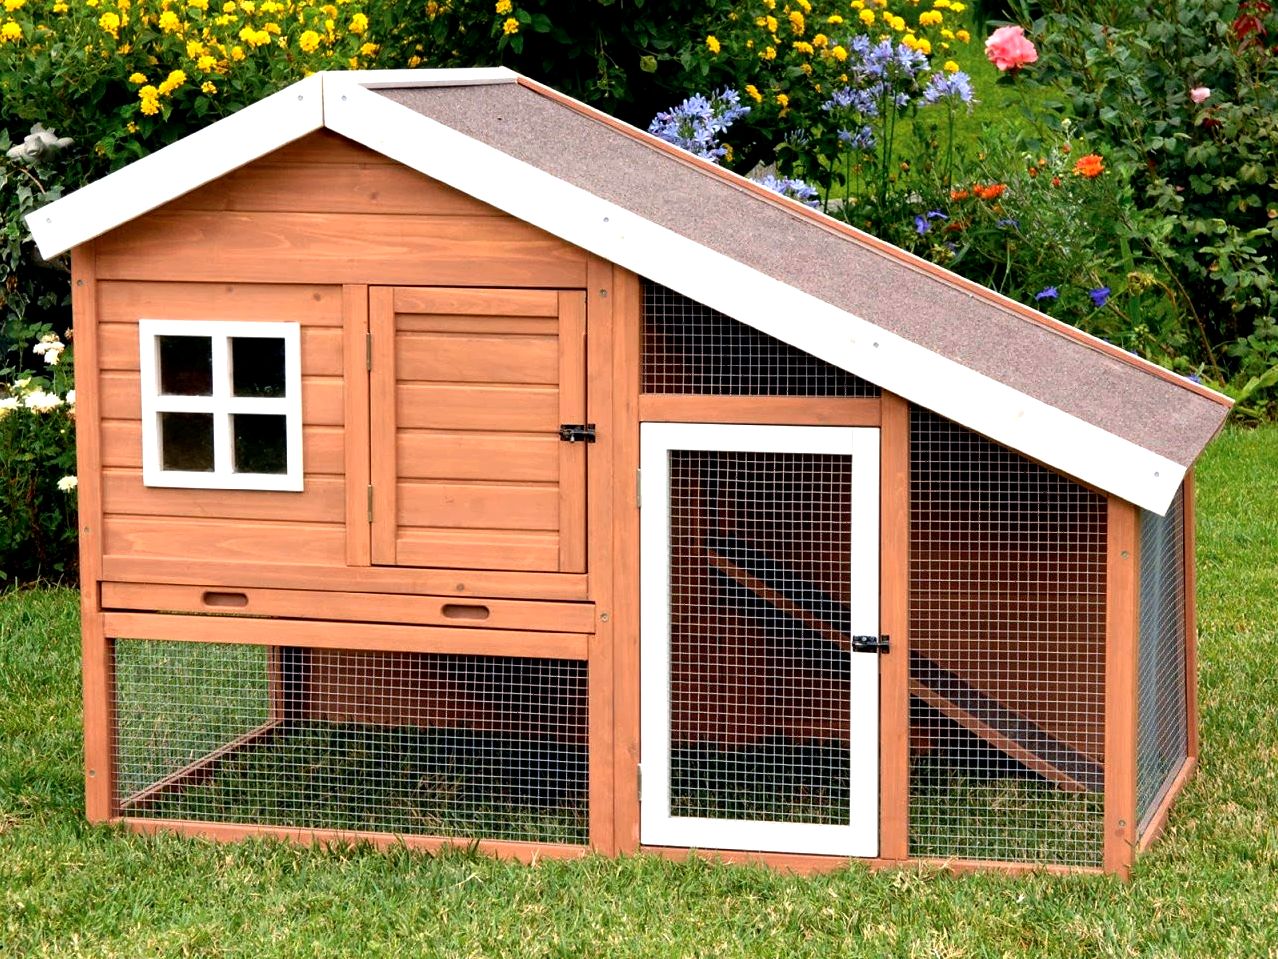 Chicken house plans Gable Chicken House Plans